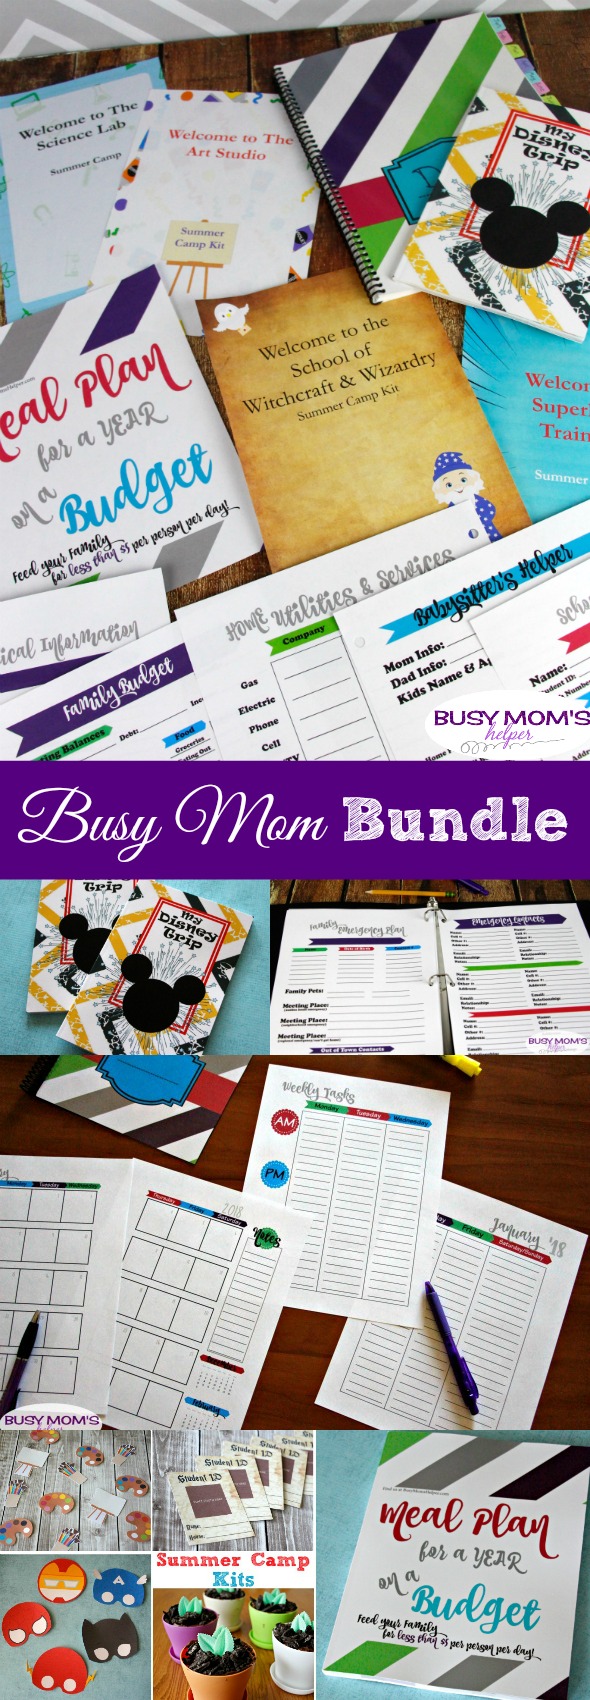 Announcing the Busy Mom Bundle - practically everything you need to help get your life in order! Whether you need help organizing your families important files, want meal plans done for you for a YEAR, love Disney activities, need a reliable planner, or help planning the best summer camp ever - this Busy Mom Bundle has practically EVERYTHING to help out! #busymombundle #printables #parenting #homebinder #familyhomebinder #family #budget #disney #summercamp #momhelp #mealplan